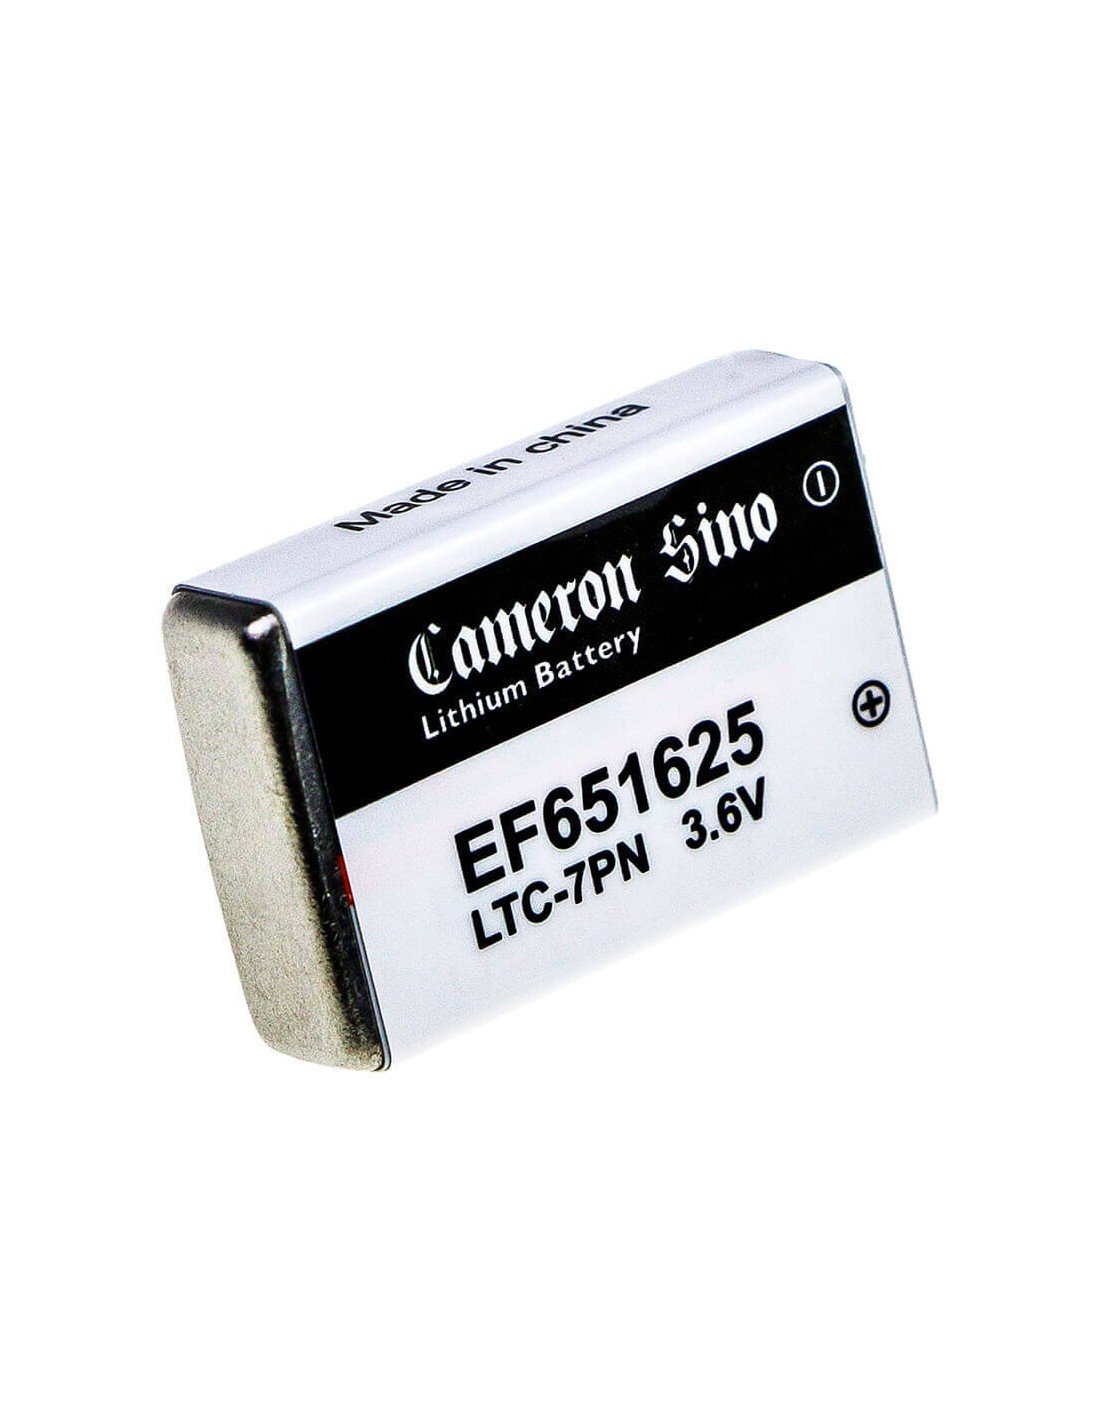 Battery for Cameron Sino Ef651625 Primary Lithium Cell Battery, Li-socl2 Ef651625 Cs-ef651625, Voltage: 3.6v Nominal Capacity: 0